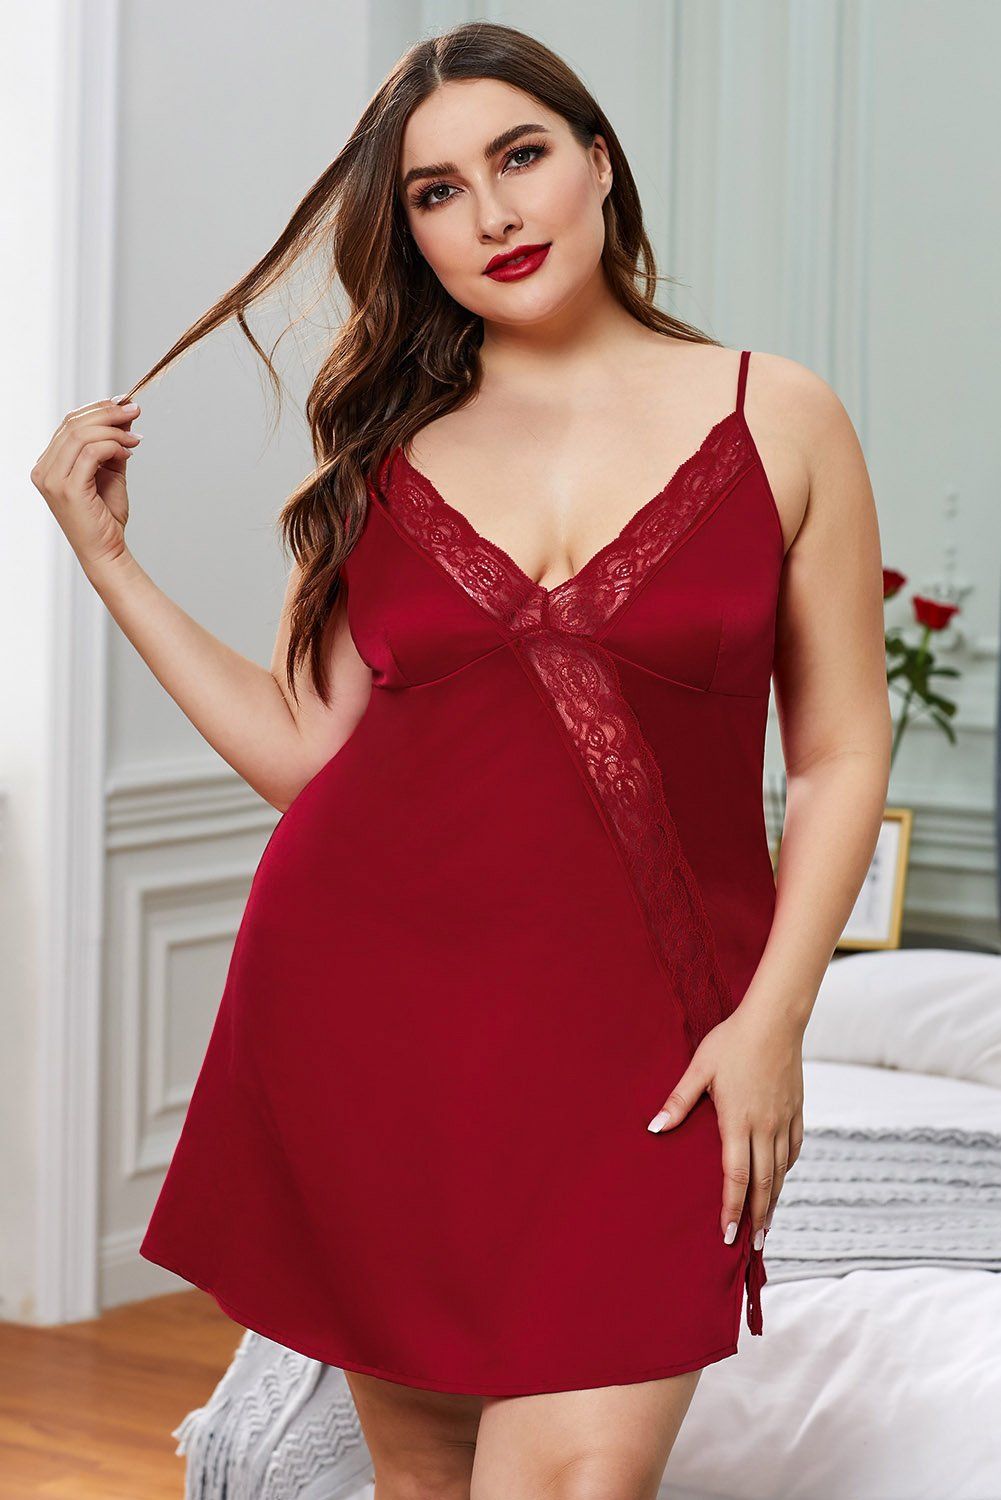 - Charmeuse fabric made which is sleek and soft, very cozy to wear
- Adjustable spaghetti straps, seductive v neck, and oblique lace insert with slits
- Different colors available and plus size for full-figured ladies
- One of our sexiest design for those romantic moments
- Wear sexy lingerie is a good way to spice up
Size Chart (CM).
Sizes.	Bust.	Length.	Trousers Waist.
	Stretched.	Stretched.	Stretched.
0X.	97.	77.	80.
1X.	104.	79.	87.
2X.	111.	81.	94.
3X.	118.	83.	101.
4X.	125.	85.	108.
5X.	132.	87.	115.
Elasticity.	None.
. . . Note:
1.There maybe 1 -2 cm. deviation in different sizes, locations and stretch of fabrics. Size chart is for reference only, there may be a little difference with what you get.
2.There are 3 kinds of elasticity: High Elasticity (two-sided stretched), Medium Elasticity (one-sided stretched) and Nonelastic (can not stretched).
3.Color may be lighter or darker due to the different PC display.
4.Wash it by hand in 30-degree water, hang to dry in shade, prohibit bleaching.
5.There maybe a slightly difference on detail and pattern.